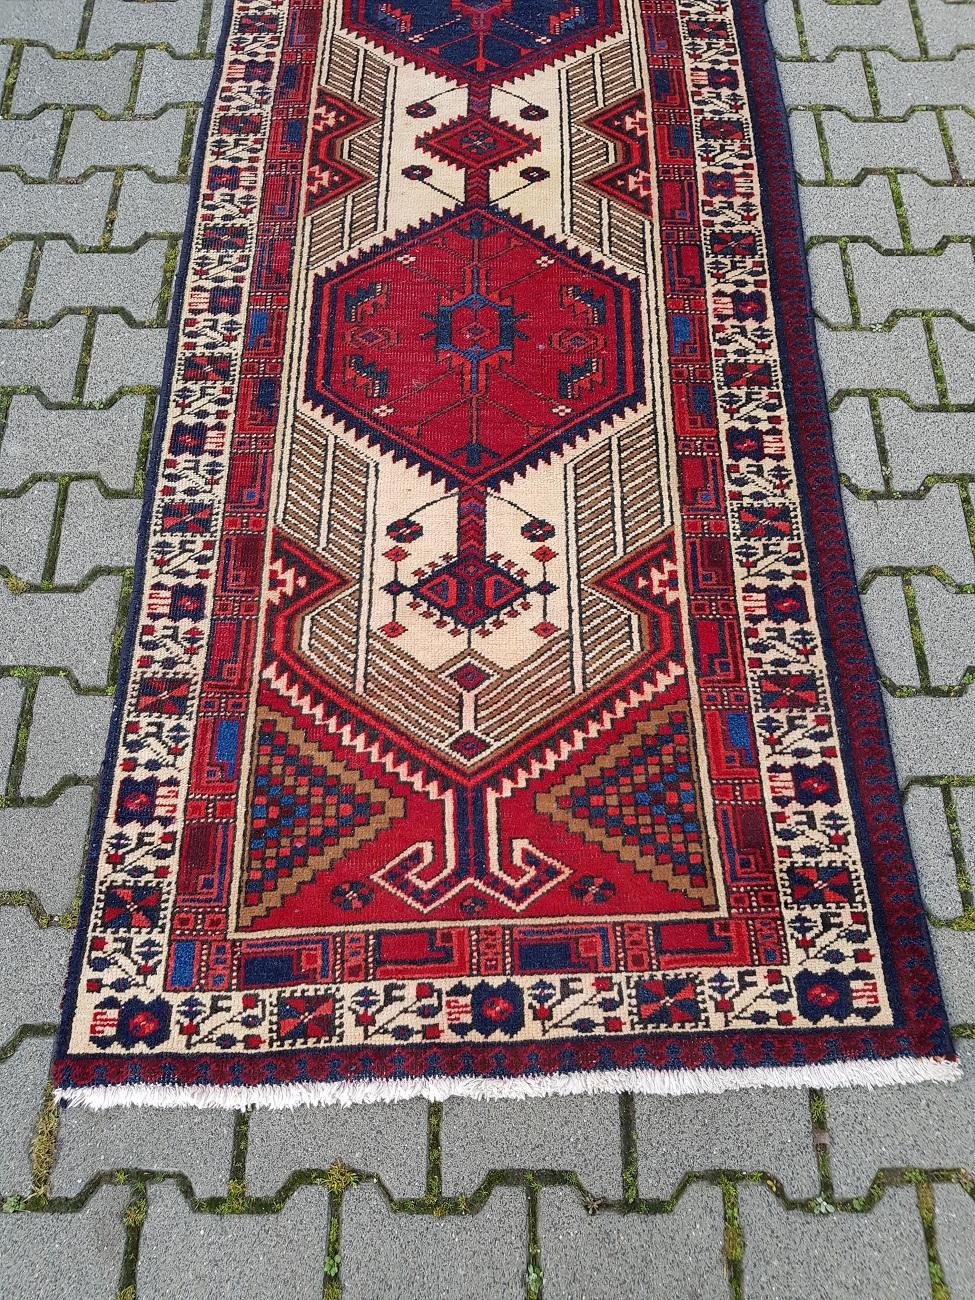 Kurdistan hand knotted carpet made of wool with cotton warp, it has a beautiful color pattern of red, beige and blue. This one is made in the second half of the 20th century and has wear consistent by age and use.

The measurements are,
With 95